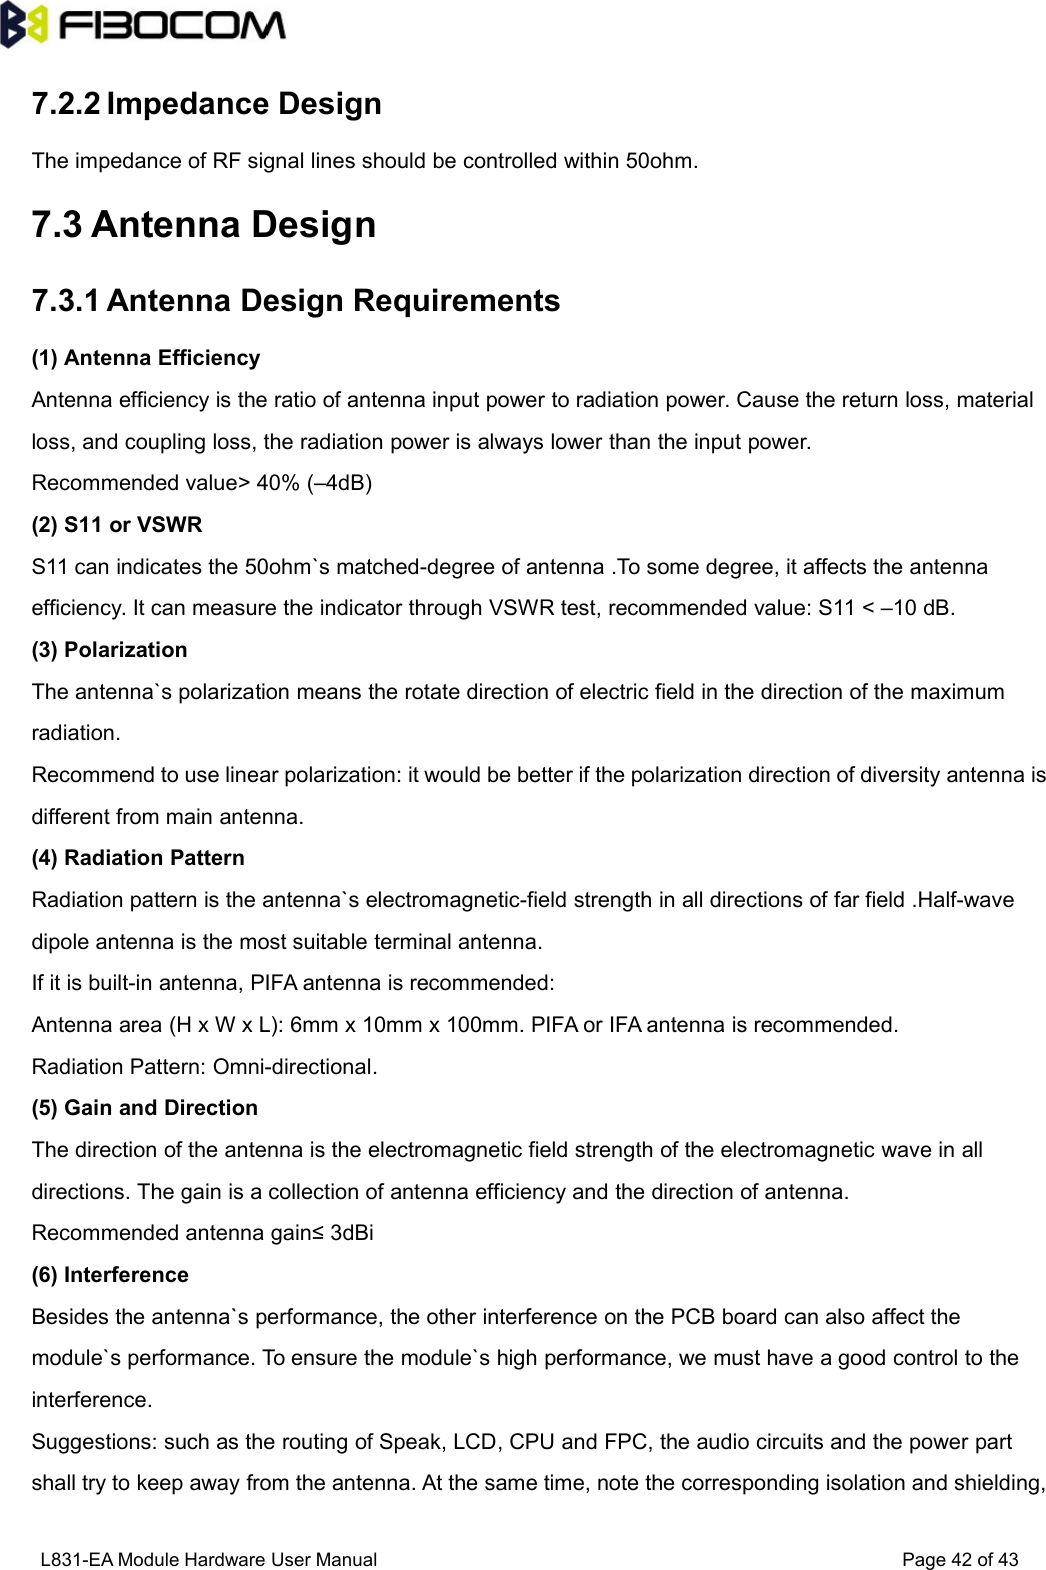 L831-EA Module Hardware User Manual Page42of437.2.2 Impedance DesignThe impedance of RF signal lines should be controlled within 50ohm.7.3 Antenna Design7.3.1 Antenna Design Requirements(1) Antenna EfficiencyAntenna efficiency is the ratio of antenna input power to radiation power. Cause the return loss, materialloss, and coupling loss, the radiation power is always lower than the input power.Recommended value&gt; 40% (–4dB)(2) S11 or VSWRS11 can indicates the 50ohm`s matched-degree of antenna .To some degree, it affects the antennaefficiency. It can measure the indicator through VSWR test, recommended value: S11 &lt; –10 dB.(3) PolarizationThe antenna`s polarization means the rotate direction of electric field in the direction of the maximumradiation.Recommend to use linear polarization: it would be better if the polarization direction of diversity antenna isdifferent from main antenna.(4) Radiation PatternRadiation pattern is the antenna`s electromagnetic-field strength in all directions of far field .Half-wavedipole antenna is the most suitable terminal antenna.If it is built-in antenna, PIFA antenna is recommended:Antenna area (H x W x L): 6mm x 10mm x 100mm. PIFA or IFA antenna is recommended.Radiation Pattern: Omni-directional.(5) Gain and DirectionThe direction of the antenna is the electromagnetic field strength of the electromagnetic wave in alldirections. The gain is a collection of antenna efficiency and the direction of antenna.Recommended antenna gain≤ 3dBi(6) InterferenceBesides the antenna`s performance, the other interference on the PCB board can also affect themodule`s performance. To ensure the module`s high performance, we must have a good control to theinterference.Suggestions: such as the routing of Speak, LCD, CPU and FPC, the audio circuits and the power partshall try to keep away from the antenna. At the same time, note the corresponding isolation and shielding,